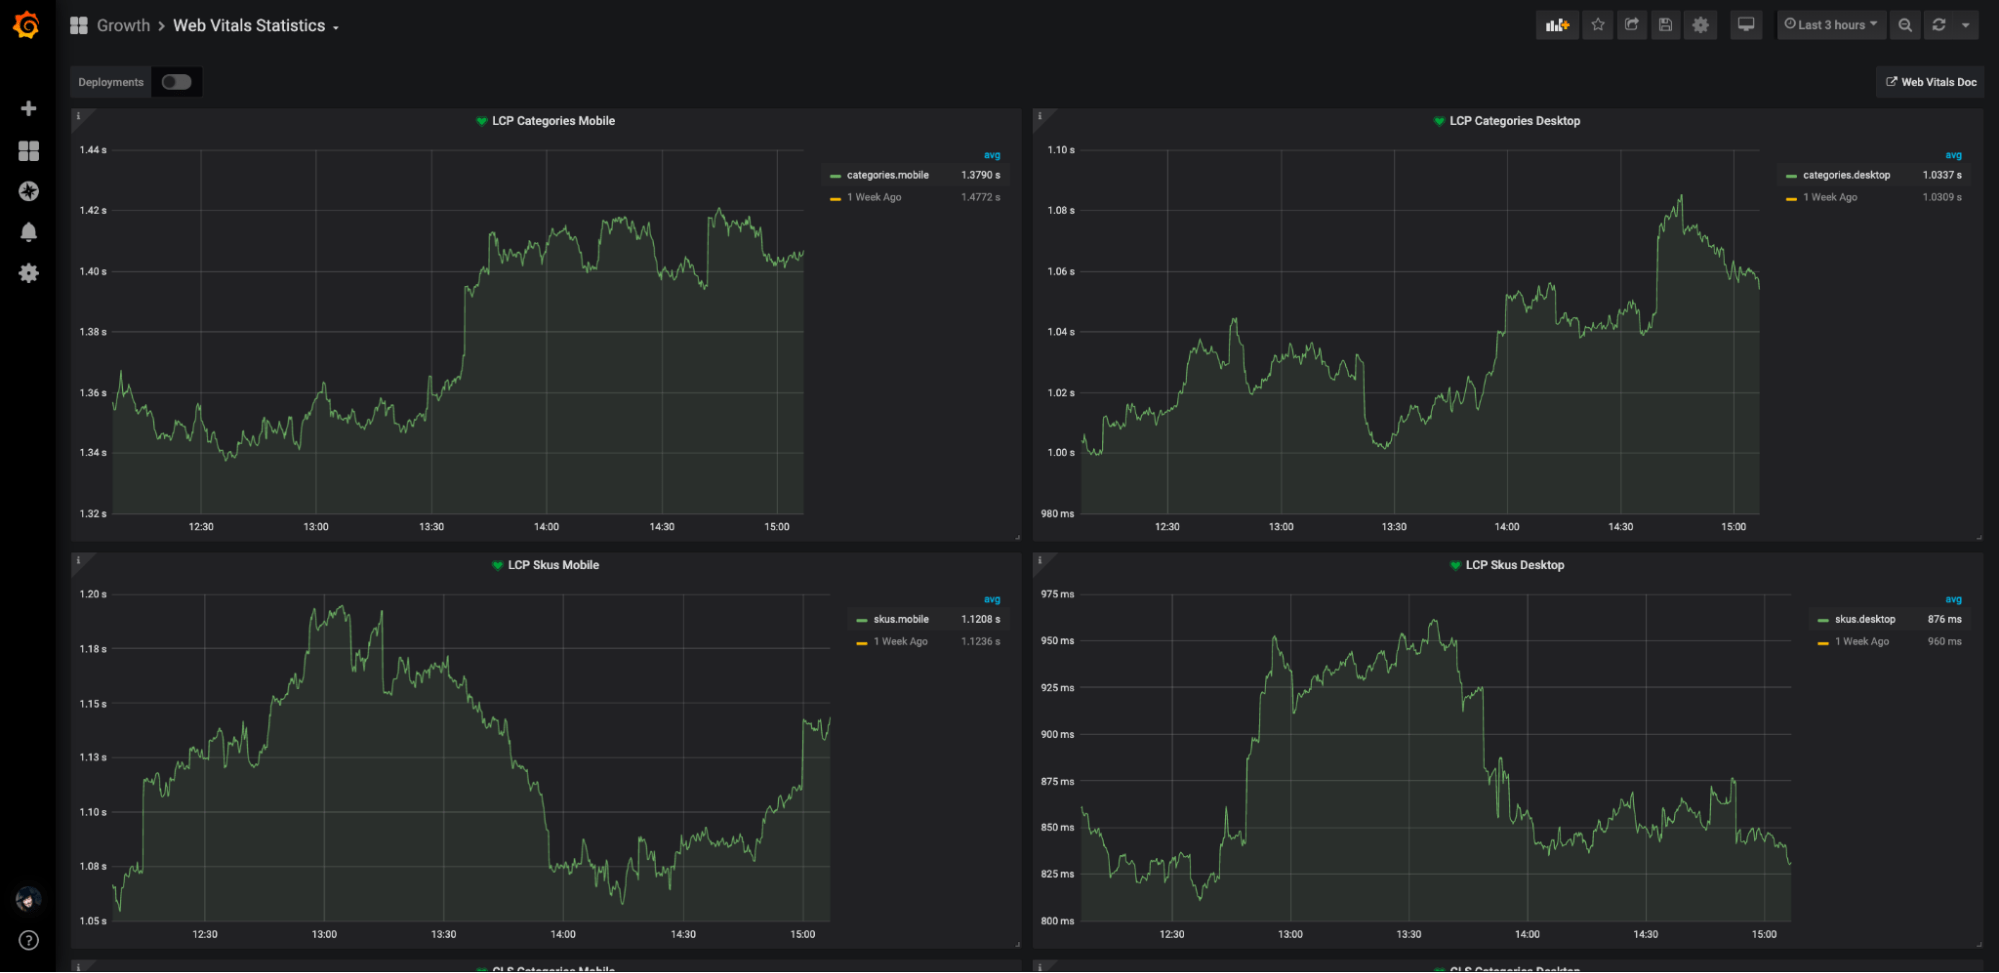 Core Web Vitals (LCP) Real-Time Continuous Monitoring dashboard for Skroutz.gr